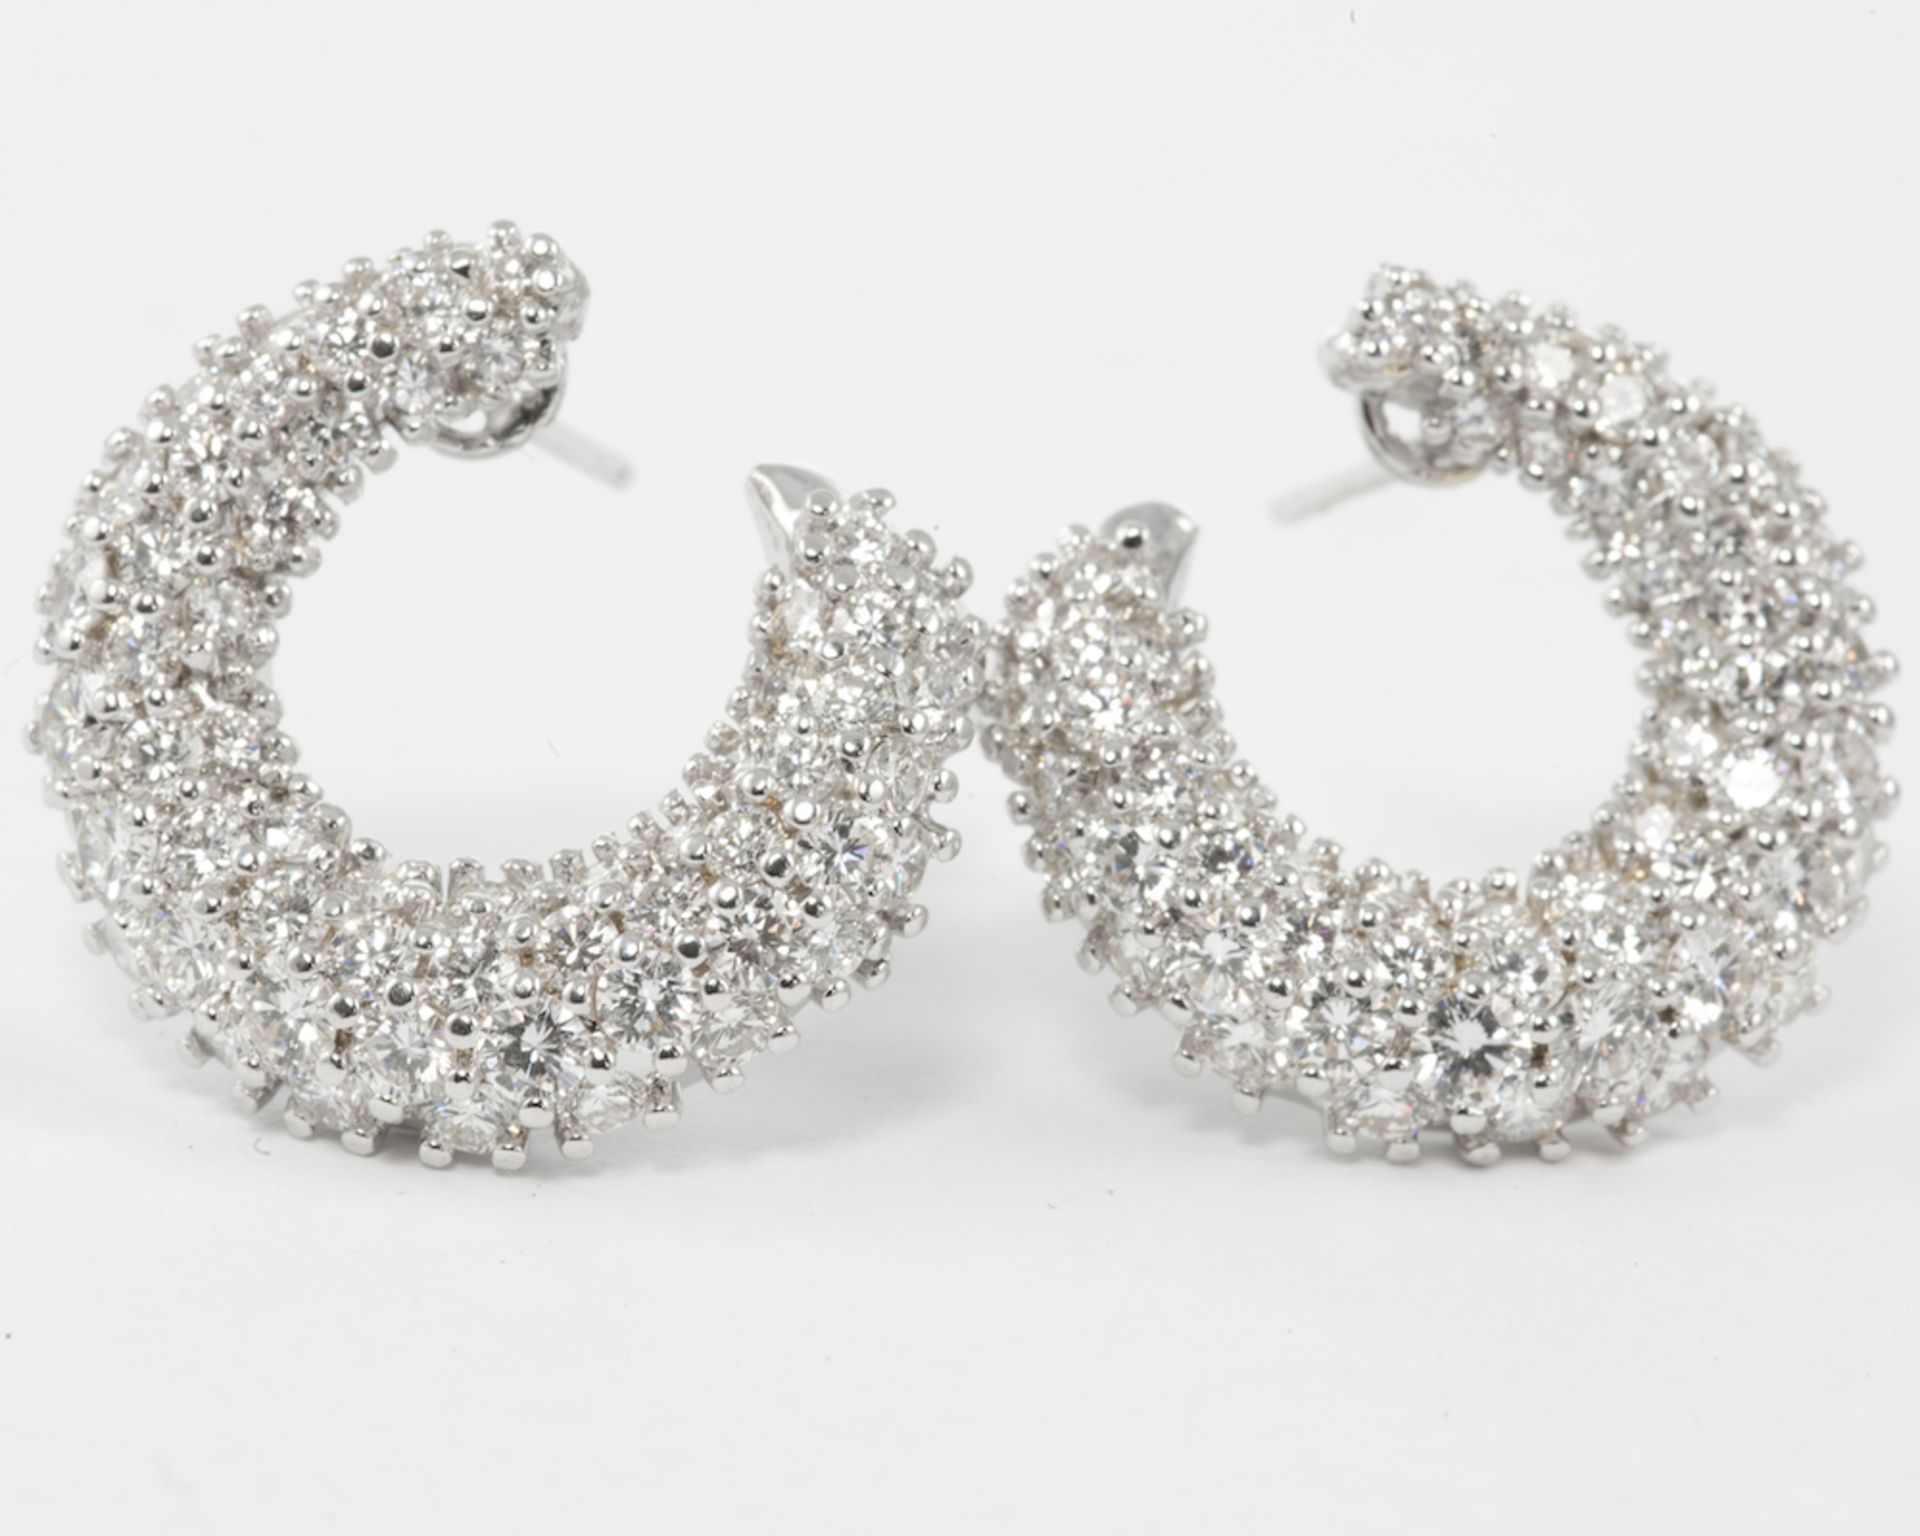 GARRARD - Pair of 18ct diamond crescent earrings, with round brilliant cut diamonds in a yellow